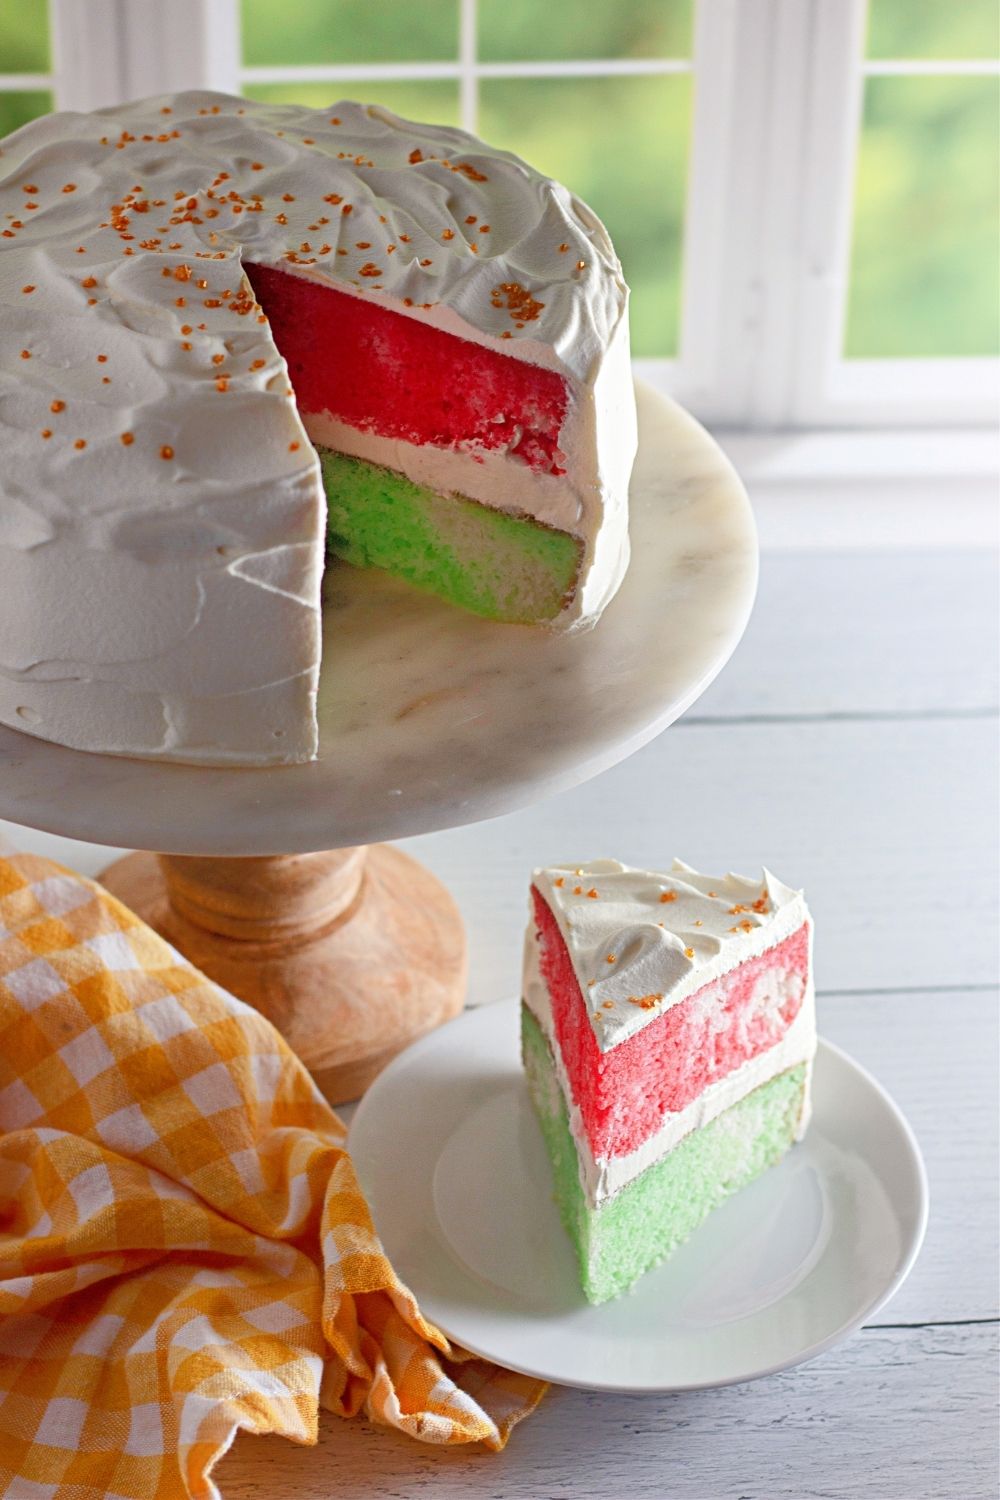 A red and green Jello cake sliced with a view inside